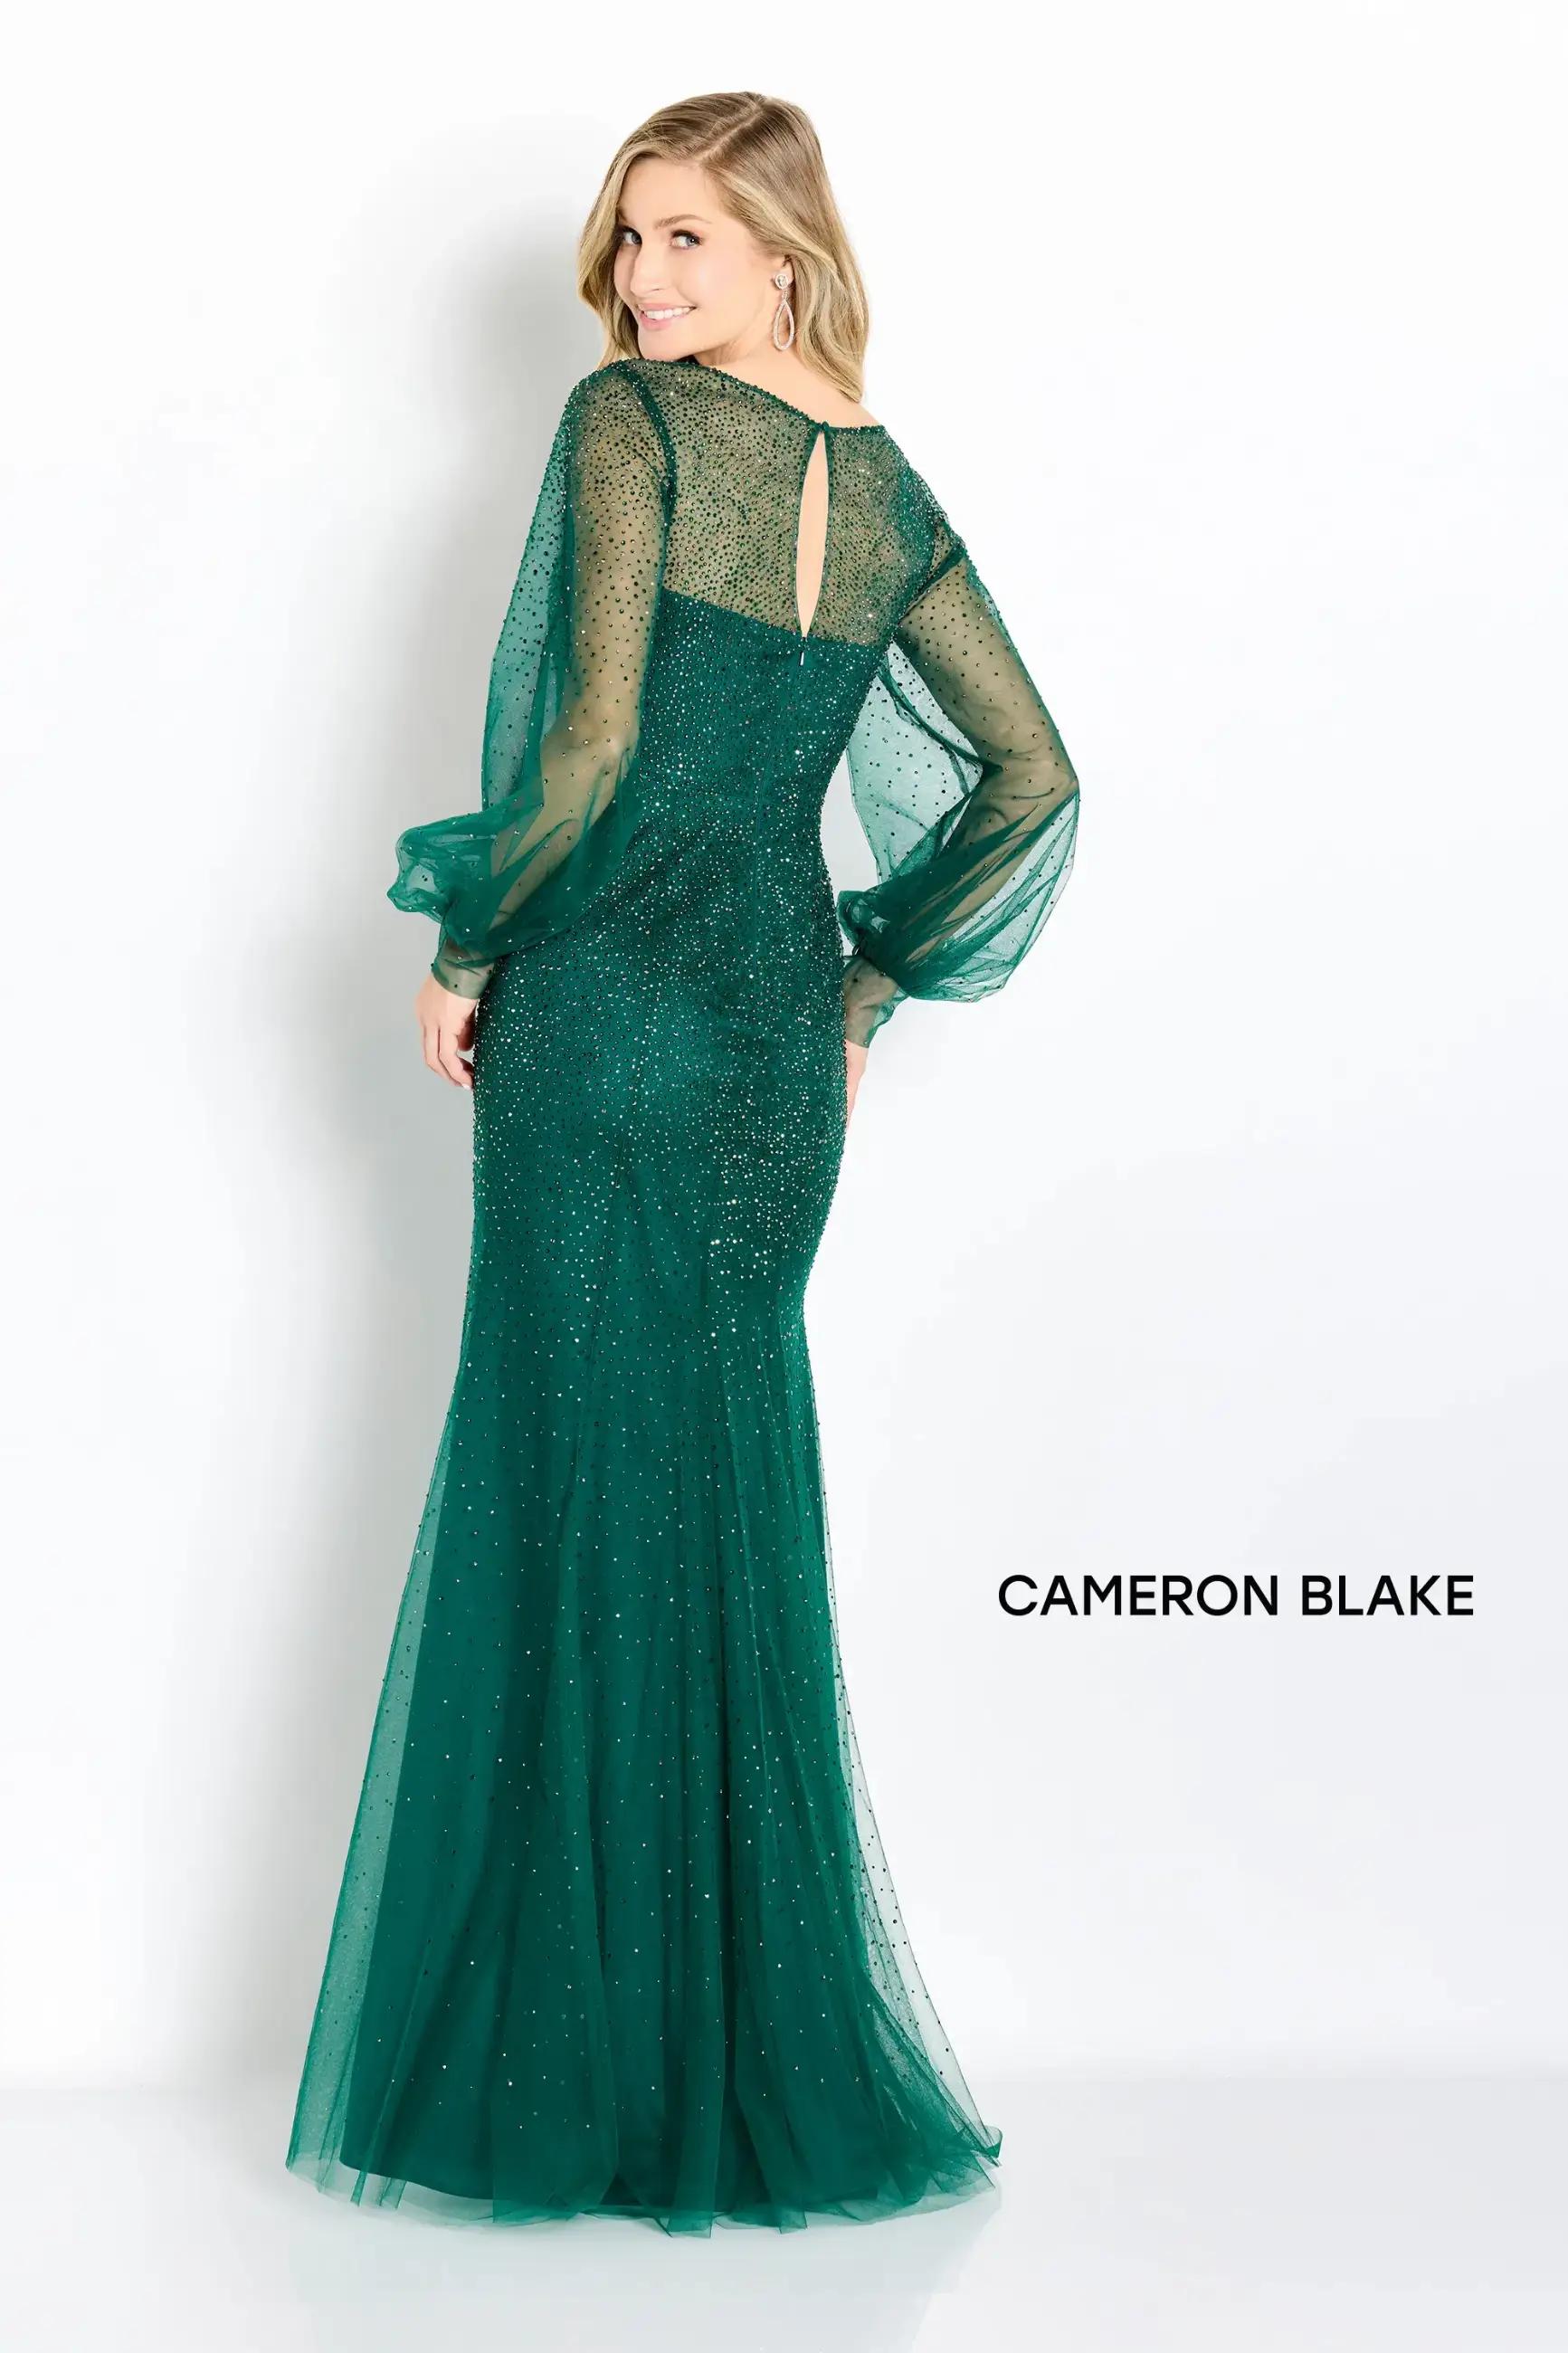 The Timeless Elegance of Emerald Green Mother of the Bride Dresses